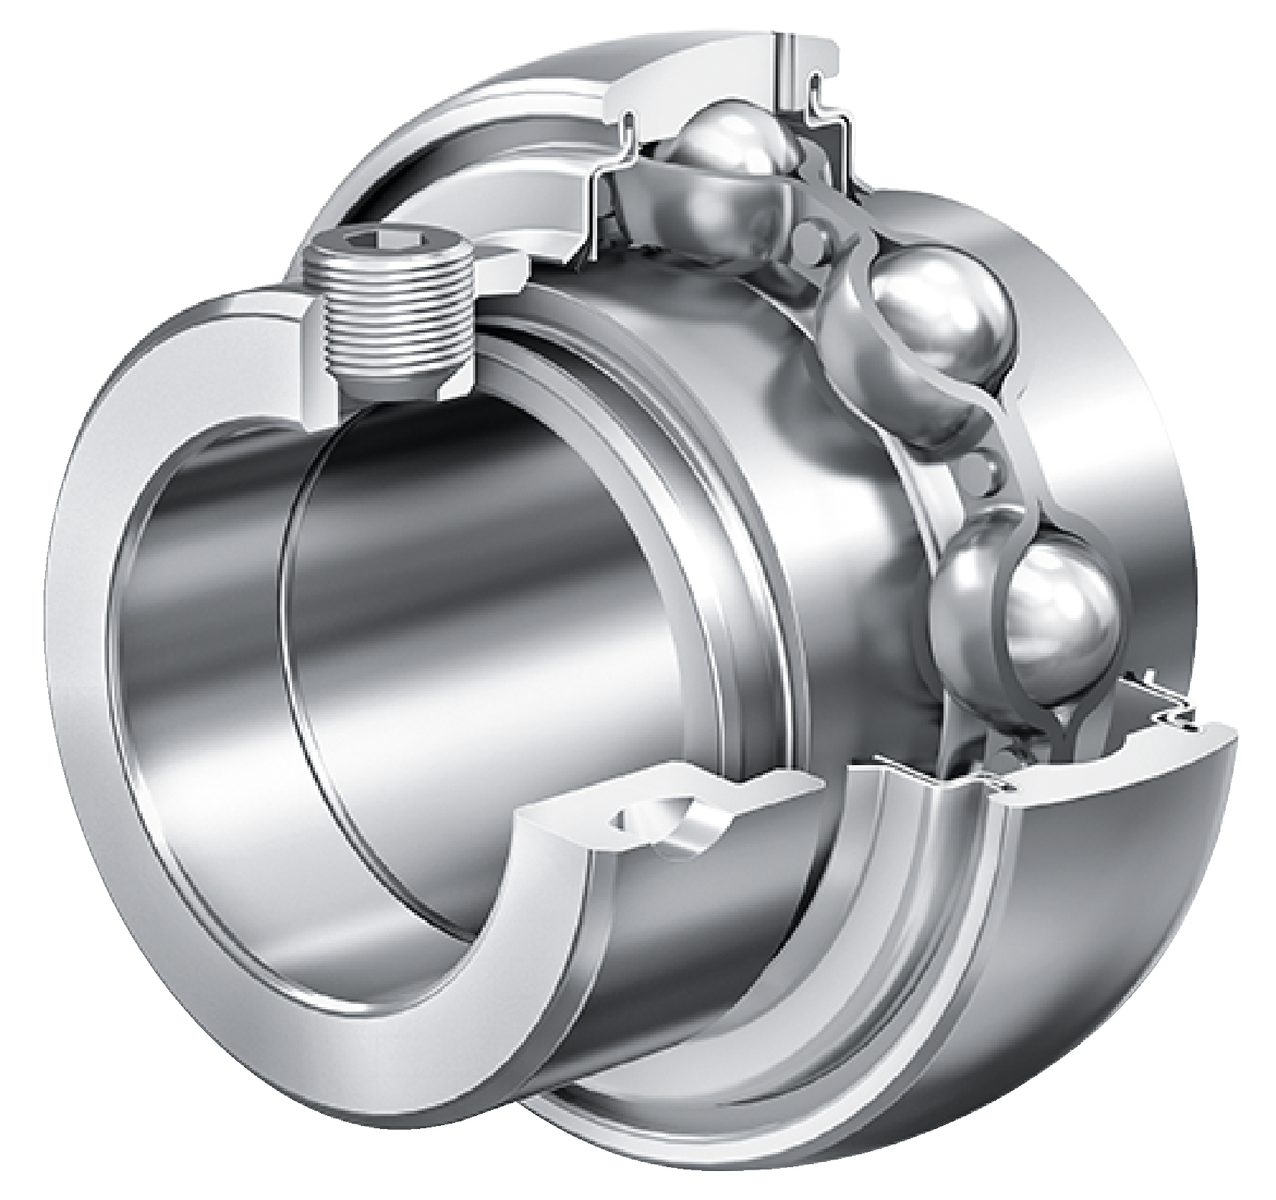 Radial Insert Ball Bearing GE..-XL-KRR-B-FA164, Spherical Outer Ring, Eccentric Locking Collar, R Seals on Both Sides, High Temperature